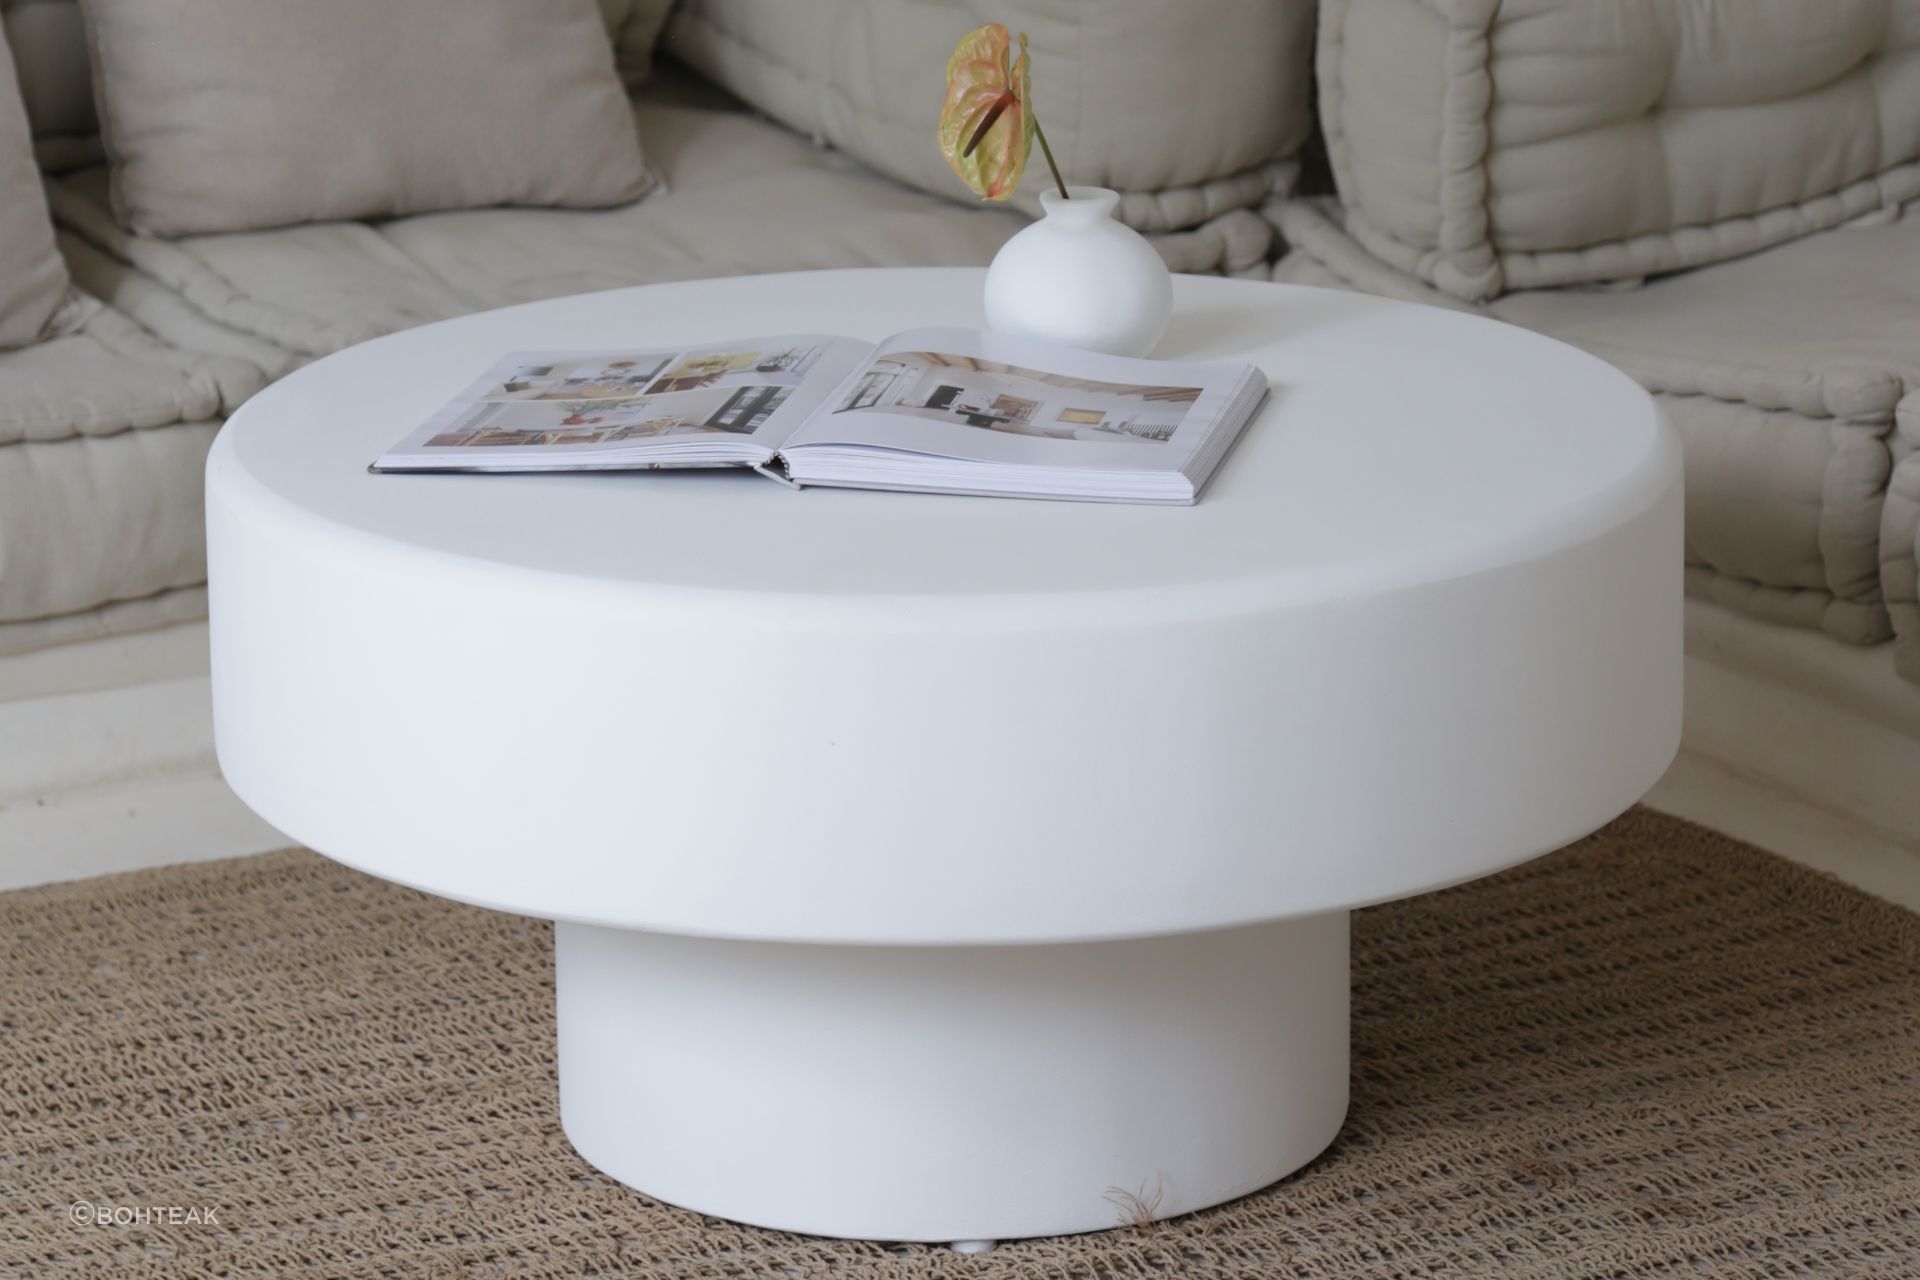 This Mediterranean coffee table has been handcrafted from a timber frame, coated with concrete, and finished in white matt paint. Featured product: Palma Coffee Table.